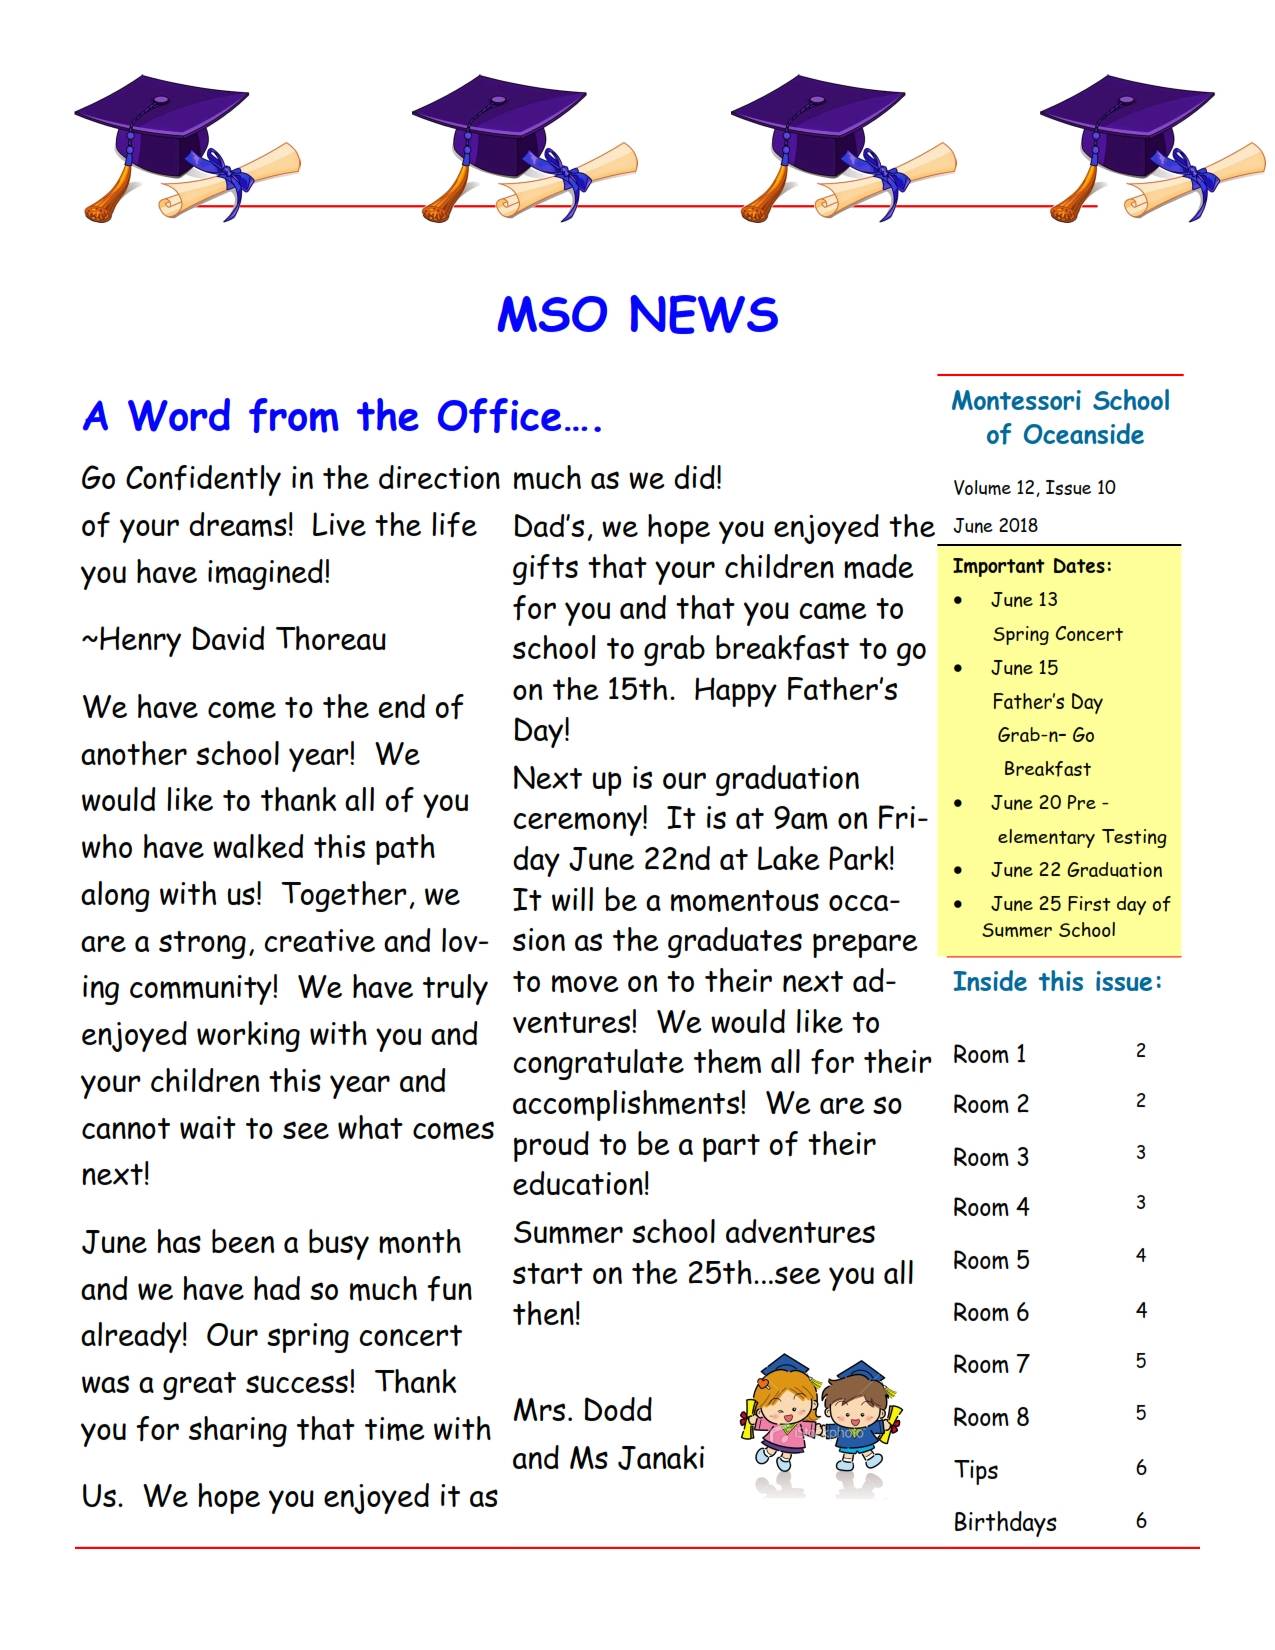 MSO June 2018 Newsletter. A Word from the Office